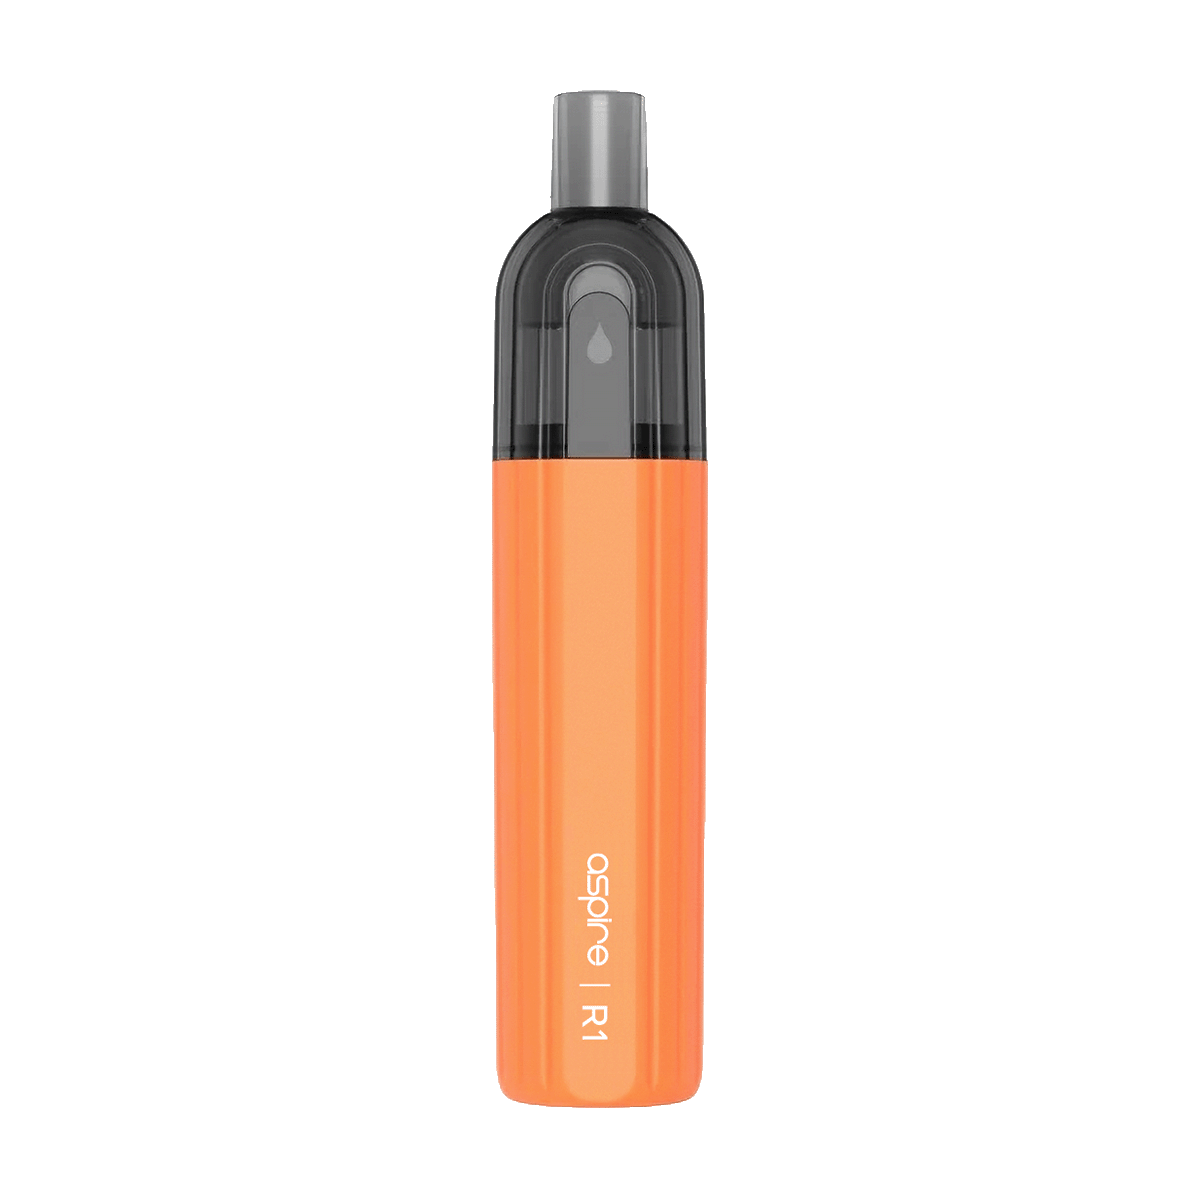 One Up R1 Disposable Device by Aspire - Orange